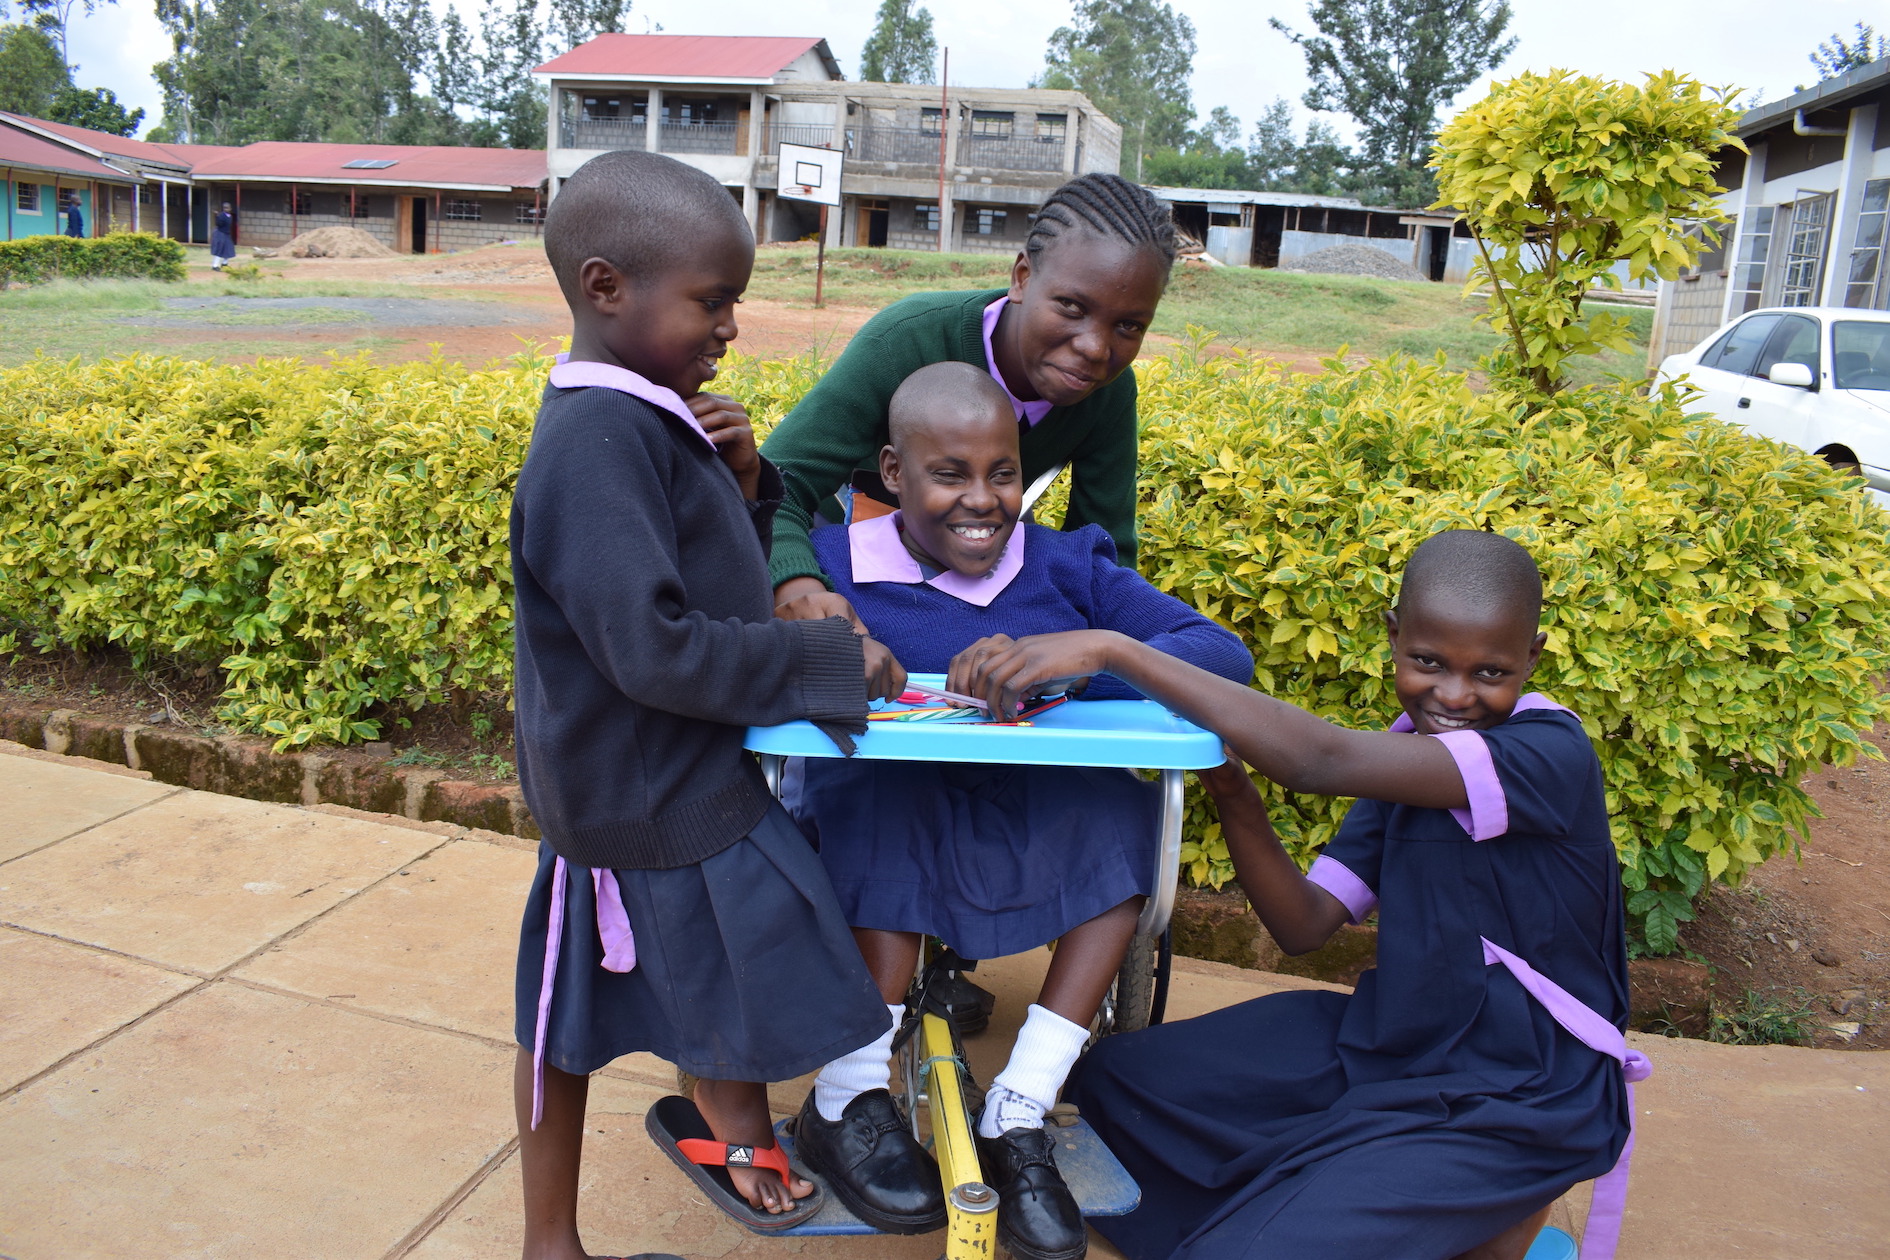 As a result of the wheelchair she received from World Vision, Isabella,13, from Western Kenya is now able to play with friends and enjoy life. ©2018 World Vision/Photo by Sarah Ooko.